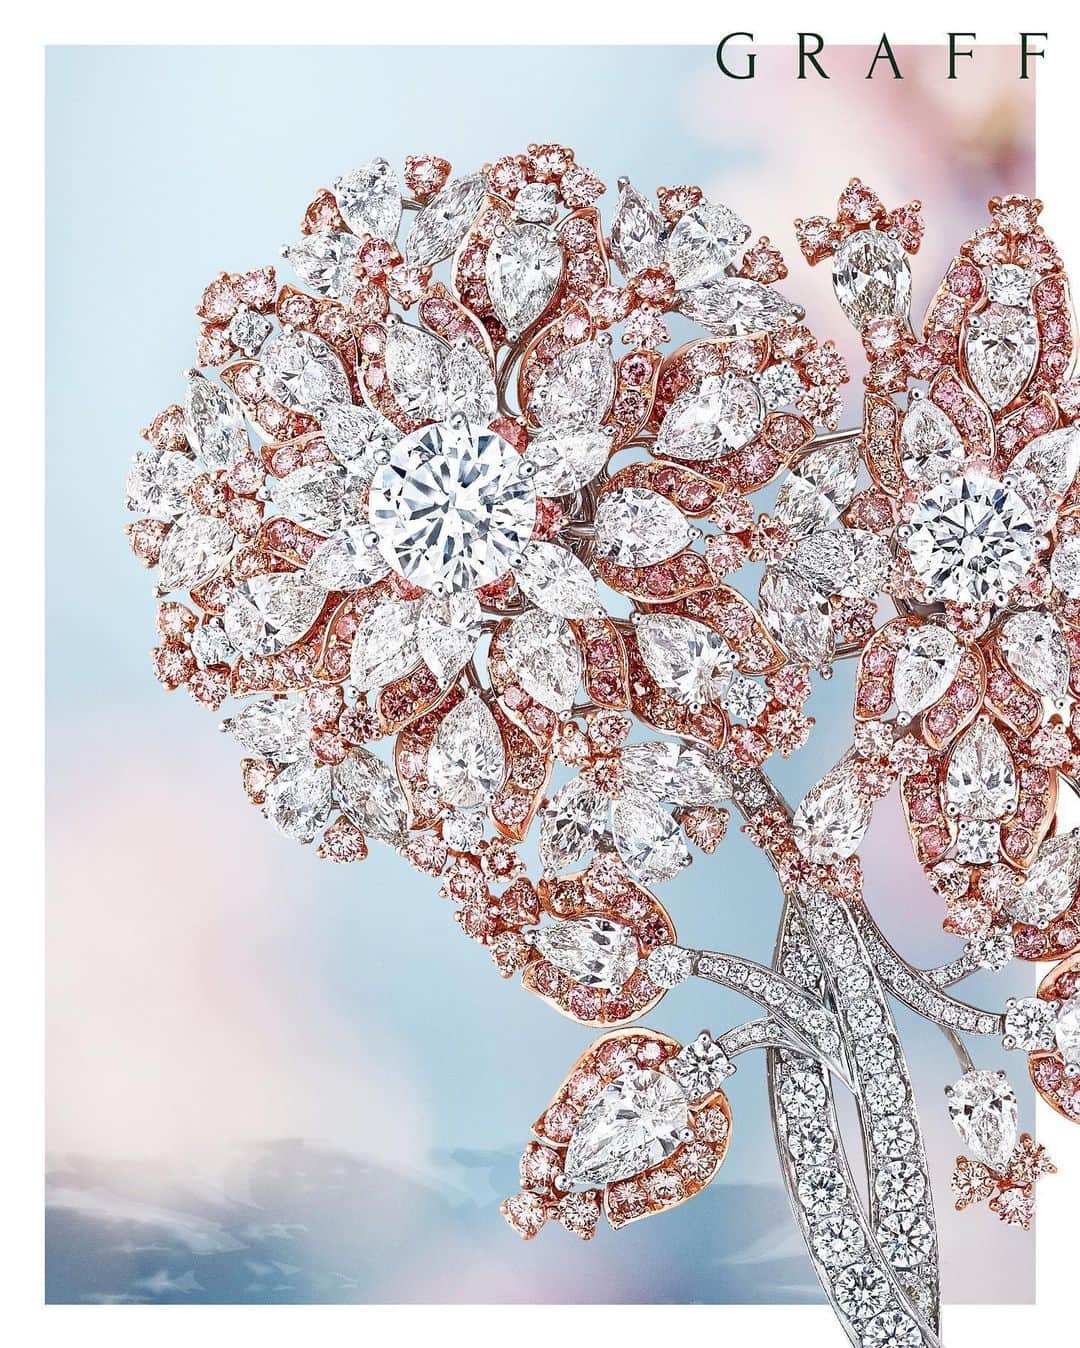 Graffさんのインスタグラム写真 - (GraffInstagram)「Spirit of Spring | A masterpiece of design and craftsmanship, pink diamonds trace the silhouette of petals, accentuating their delicacy, in our enchantingly intricate floral high jewellery brooch. ⠀⠀⠀⠀⠀⠀⠀⠀⠀ ⠀⠀⠀⠀⠀⠀⠀⠀⠀ ⠀⠀⠀⠀⠀⠀⠀⠀⠀ ⠀⠀⠀⠀⠀⠀⠀⠀⠀ ⠀⠀⠀⠀⠀⠀⠀⠀⠀ ⠀⠀⠀⠀⠀⠀⠀⠀⠀ ⠀⠀⠀⠀⠀⠀⠀⠀⠀ ⠀⠀⠀⠀⠀⠀⠀⠀⠀ ⠀⠀⠀⠀⠀⠀⠀⠀⠀ ⠀⠀⠀⠀⠀⠀⠀⠀⠀ ⠀⠀⠀⠀⠀⠀⠀⠀⠀ ⠀⠀⠀⠀⠀⠀⠀⠀⠀ ⠀⠀⠀⠀⠀⠀⠀⠀⠀ ⠀⠀⠀⠀ #GraffDiamonds #HighJewelry #SpiritofSpring #FallinLoveWithGraff」6月2日 19時41分 - graff